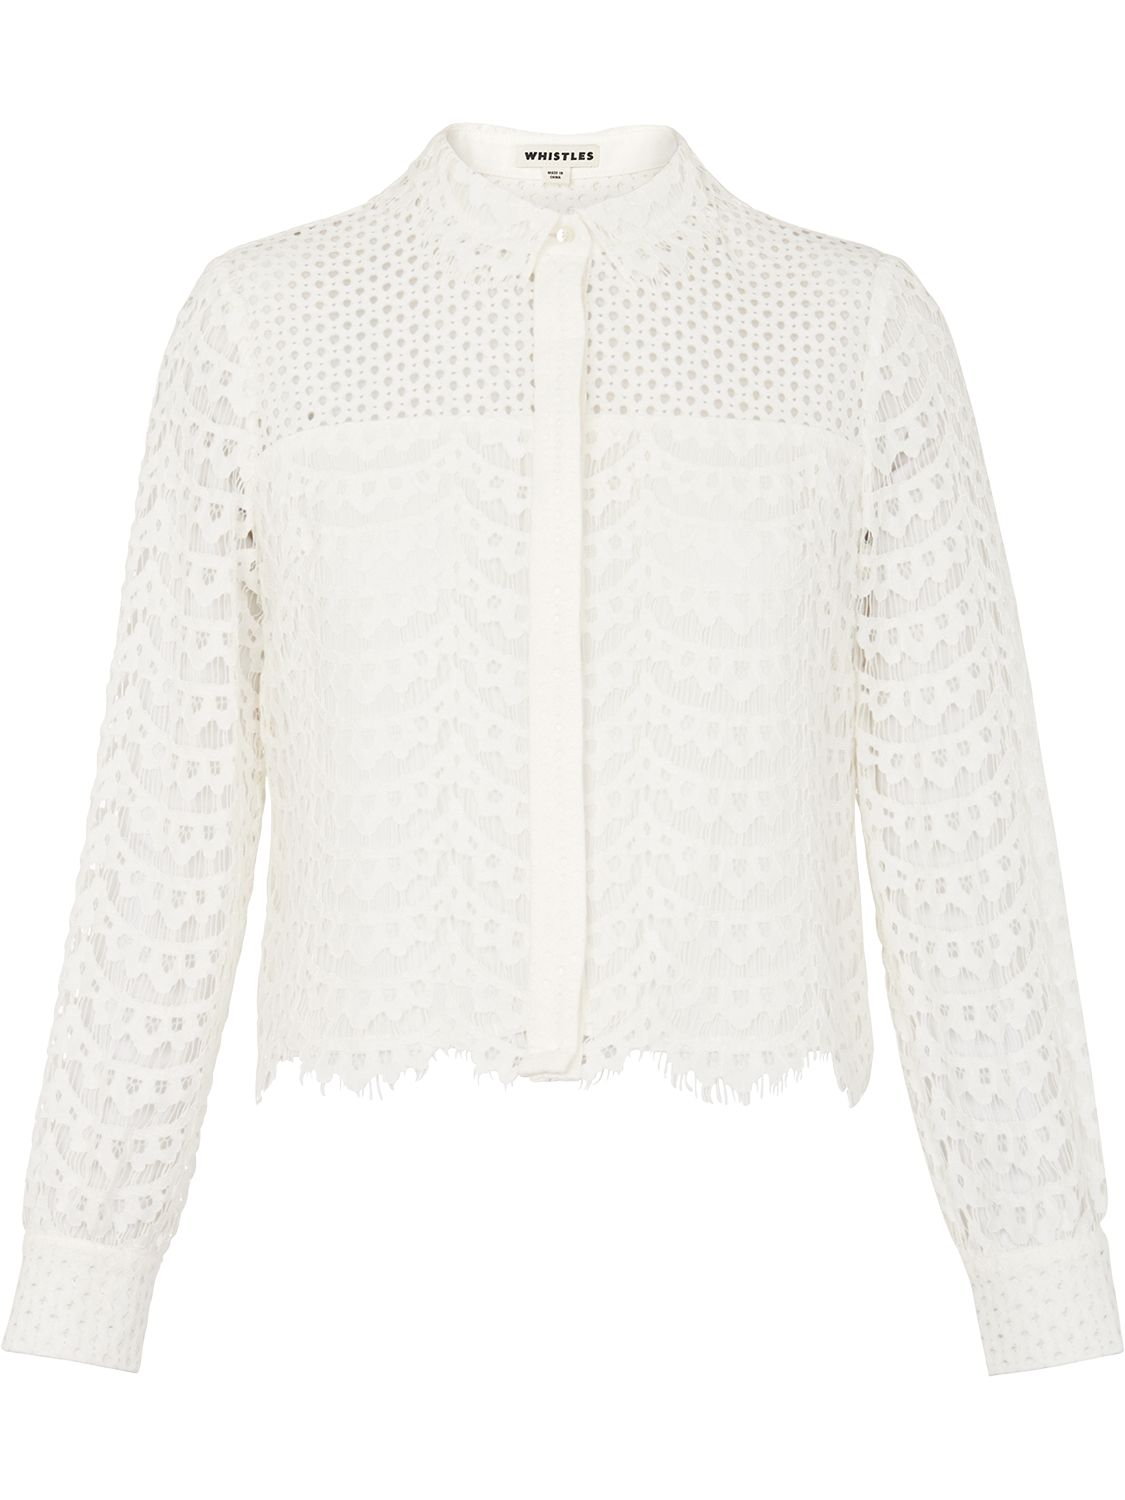 Whistles Penny Lace Top, Ivory